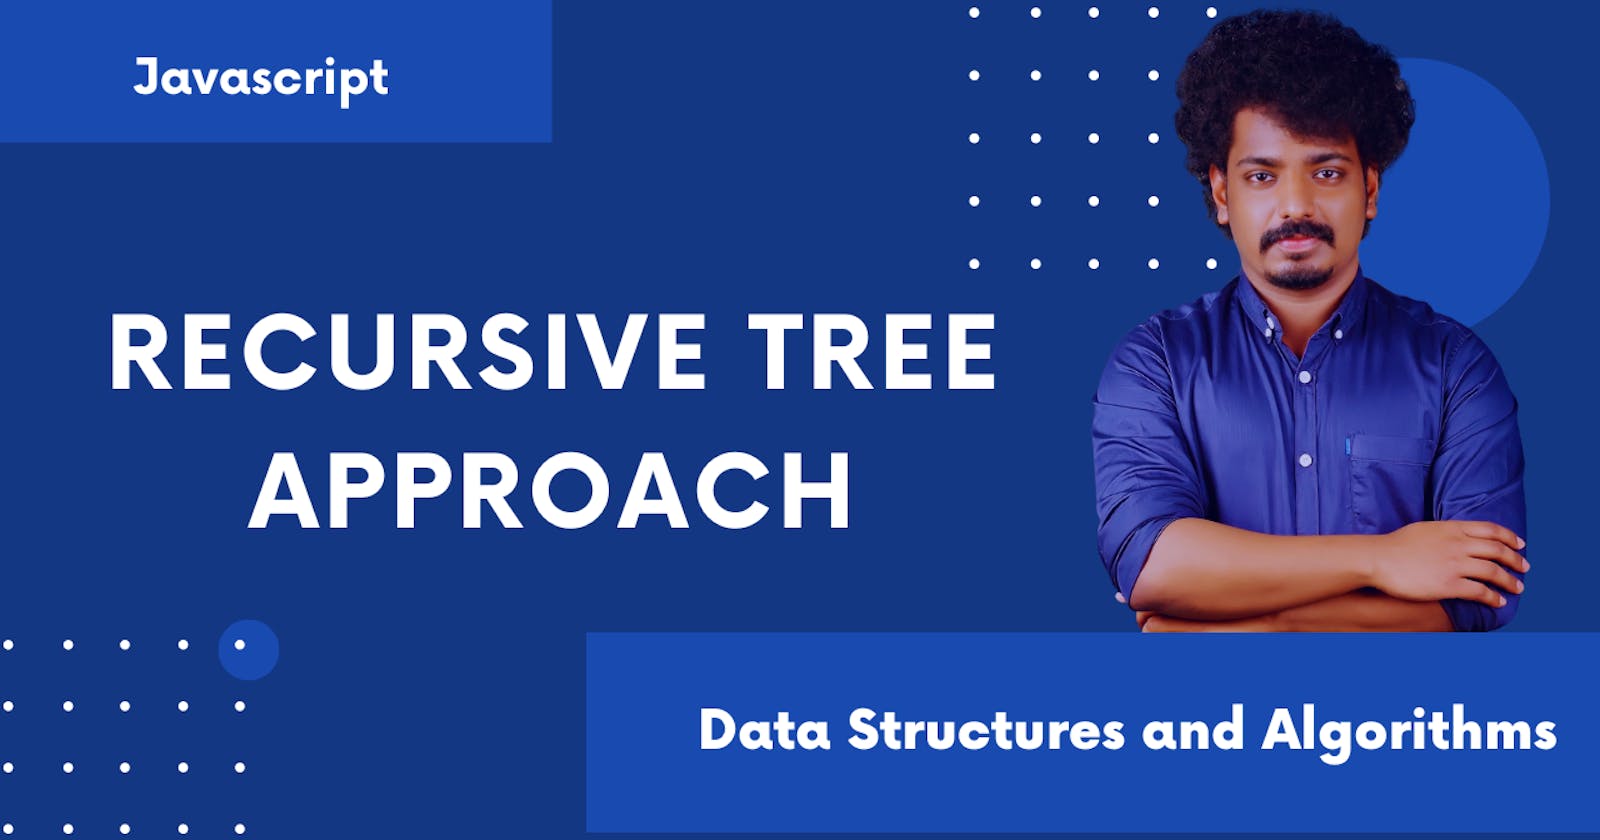 Recurrence Relation and Recursive Tree Approach